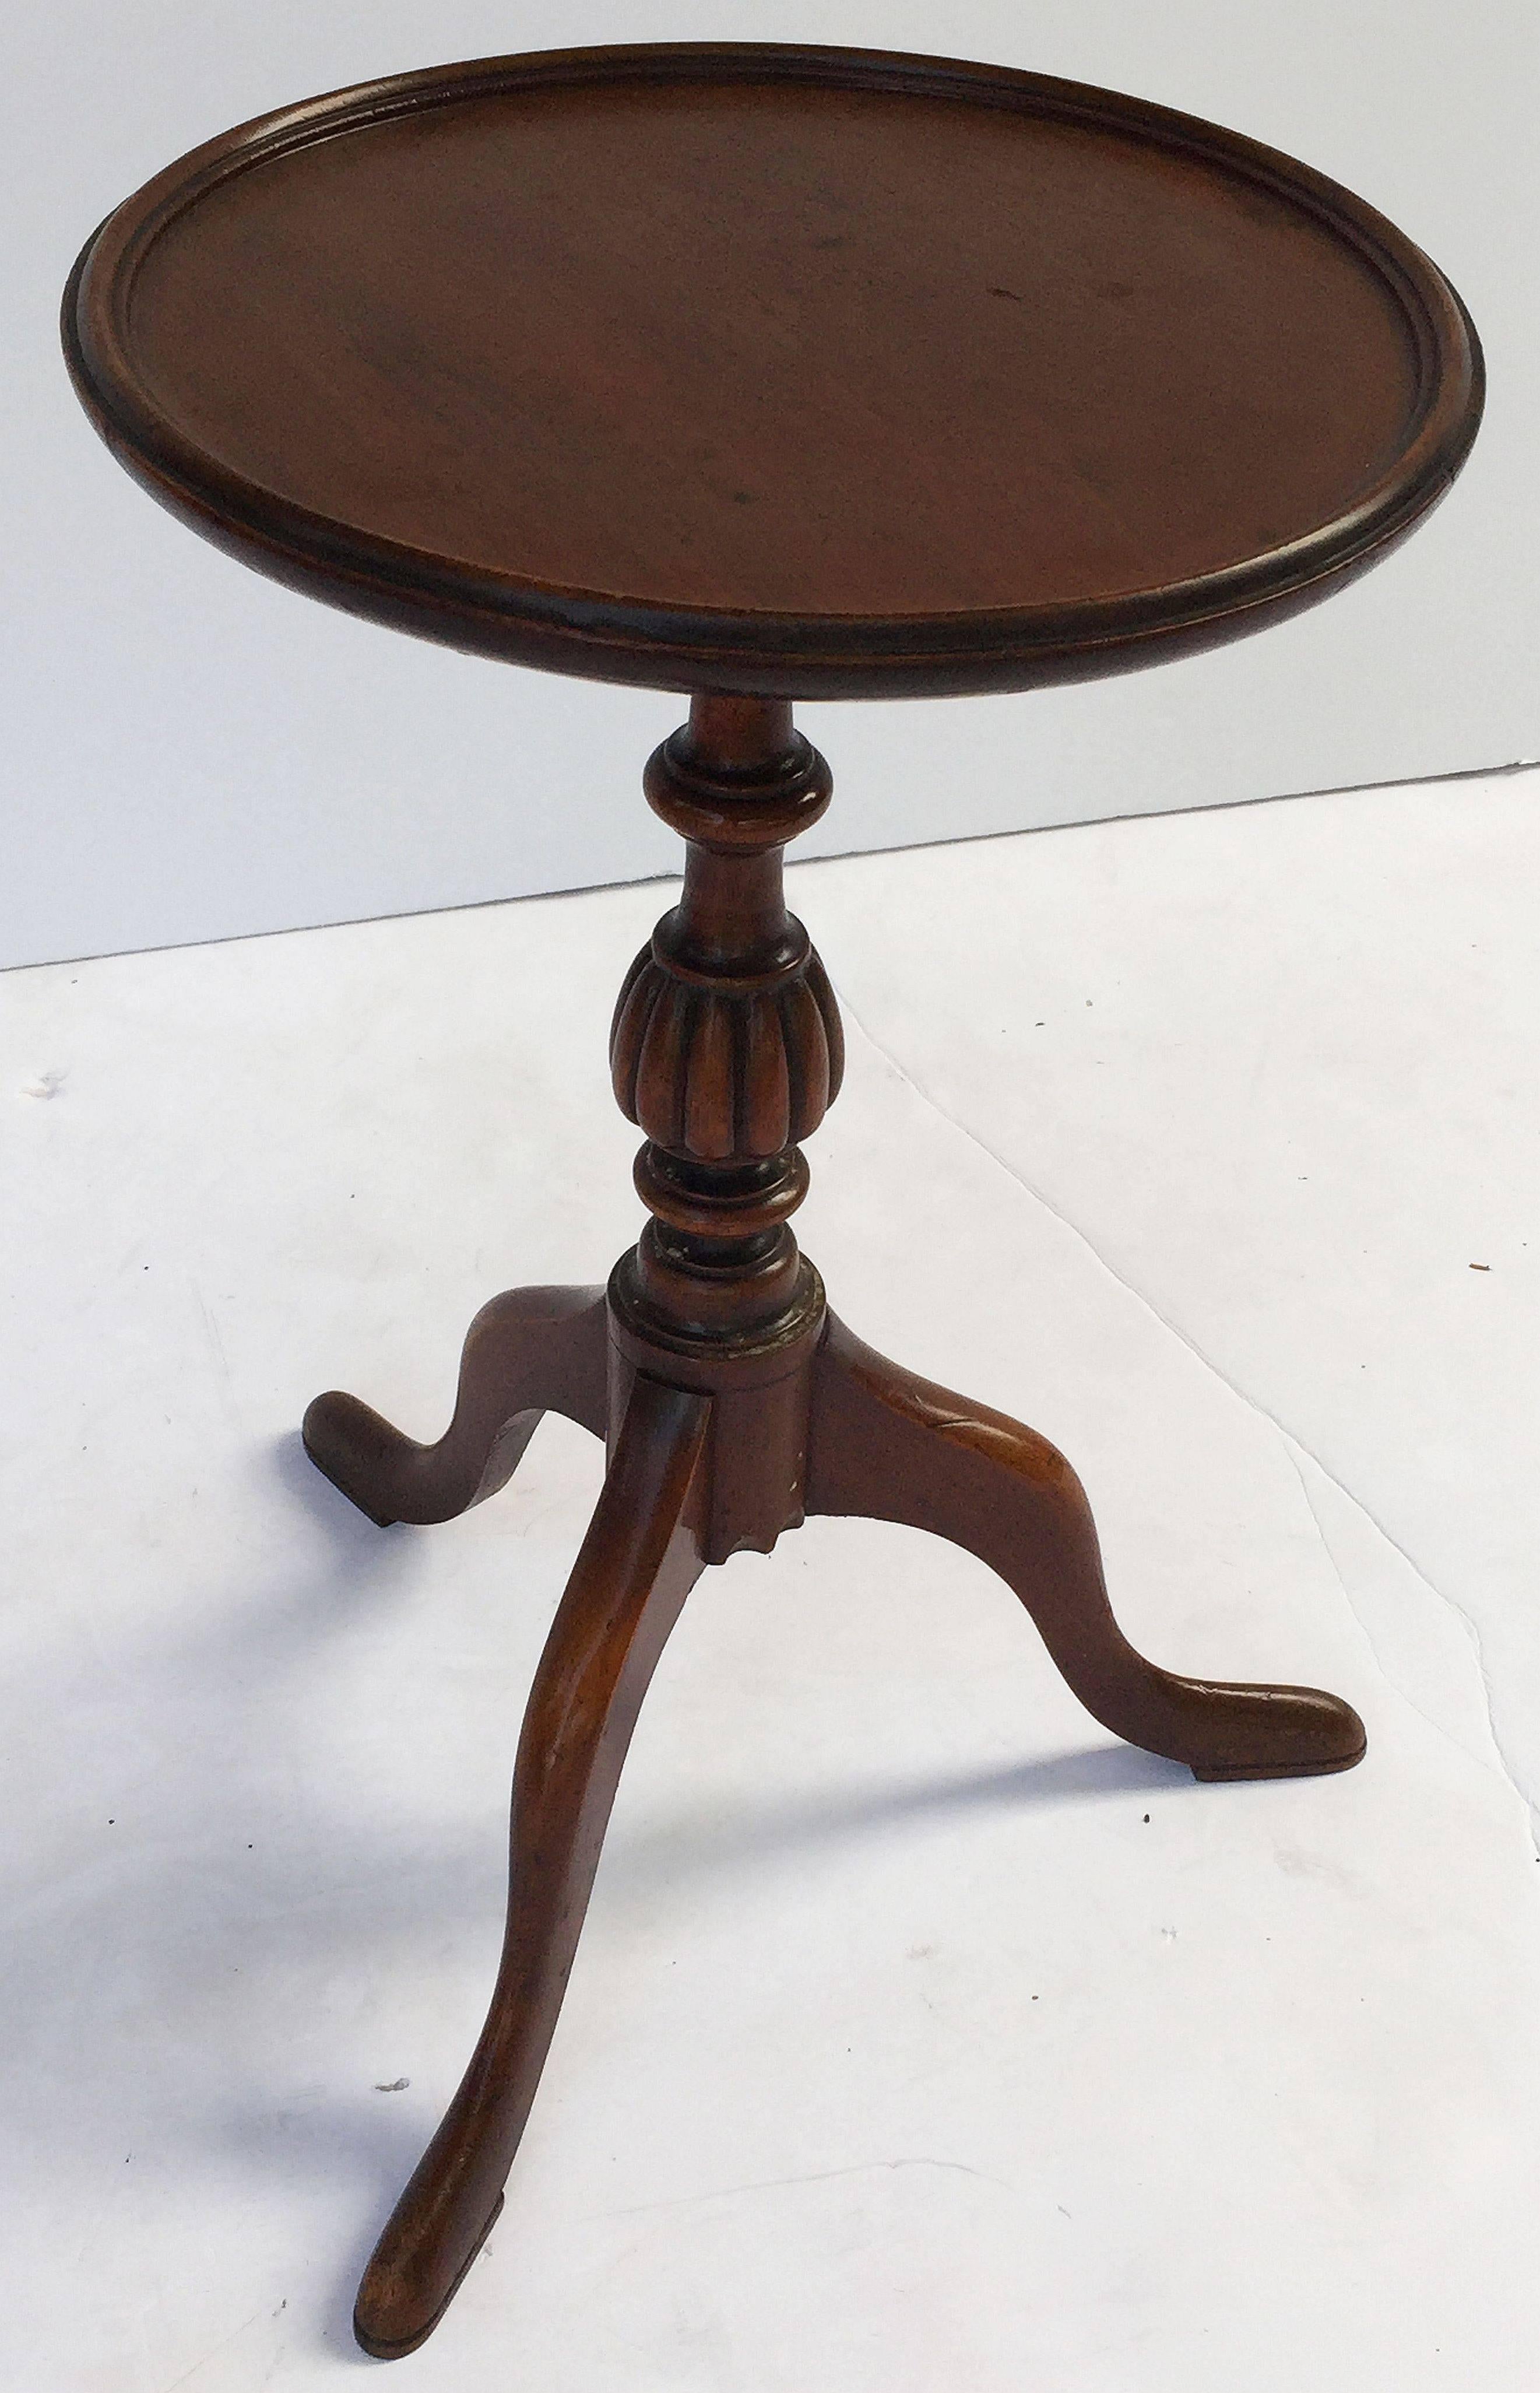 An English wine table of mahogany from the Edwardian era, featuring a raised edge around the circumference of the round, moulded top, mounted upon a turned column pedestal with tripod base. Set upon pad feet. 

An excellent choice as a side table